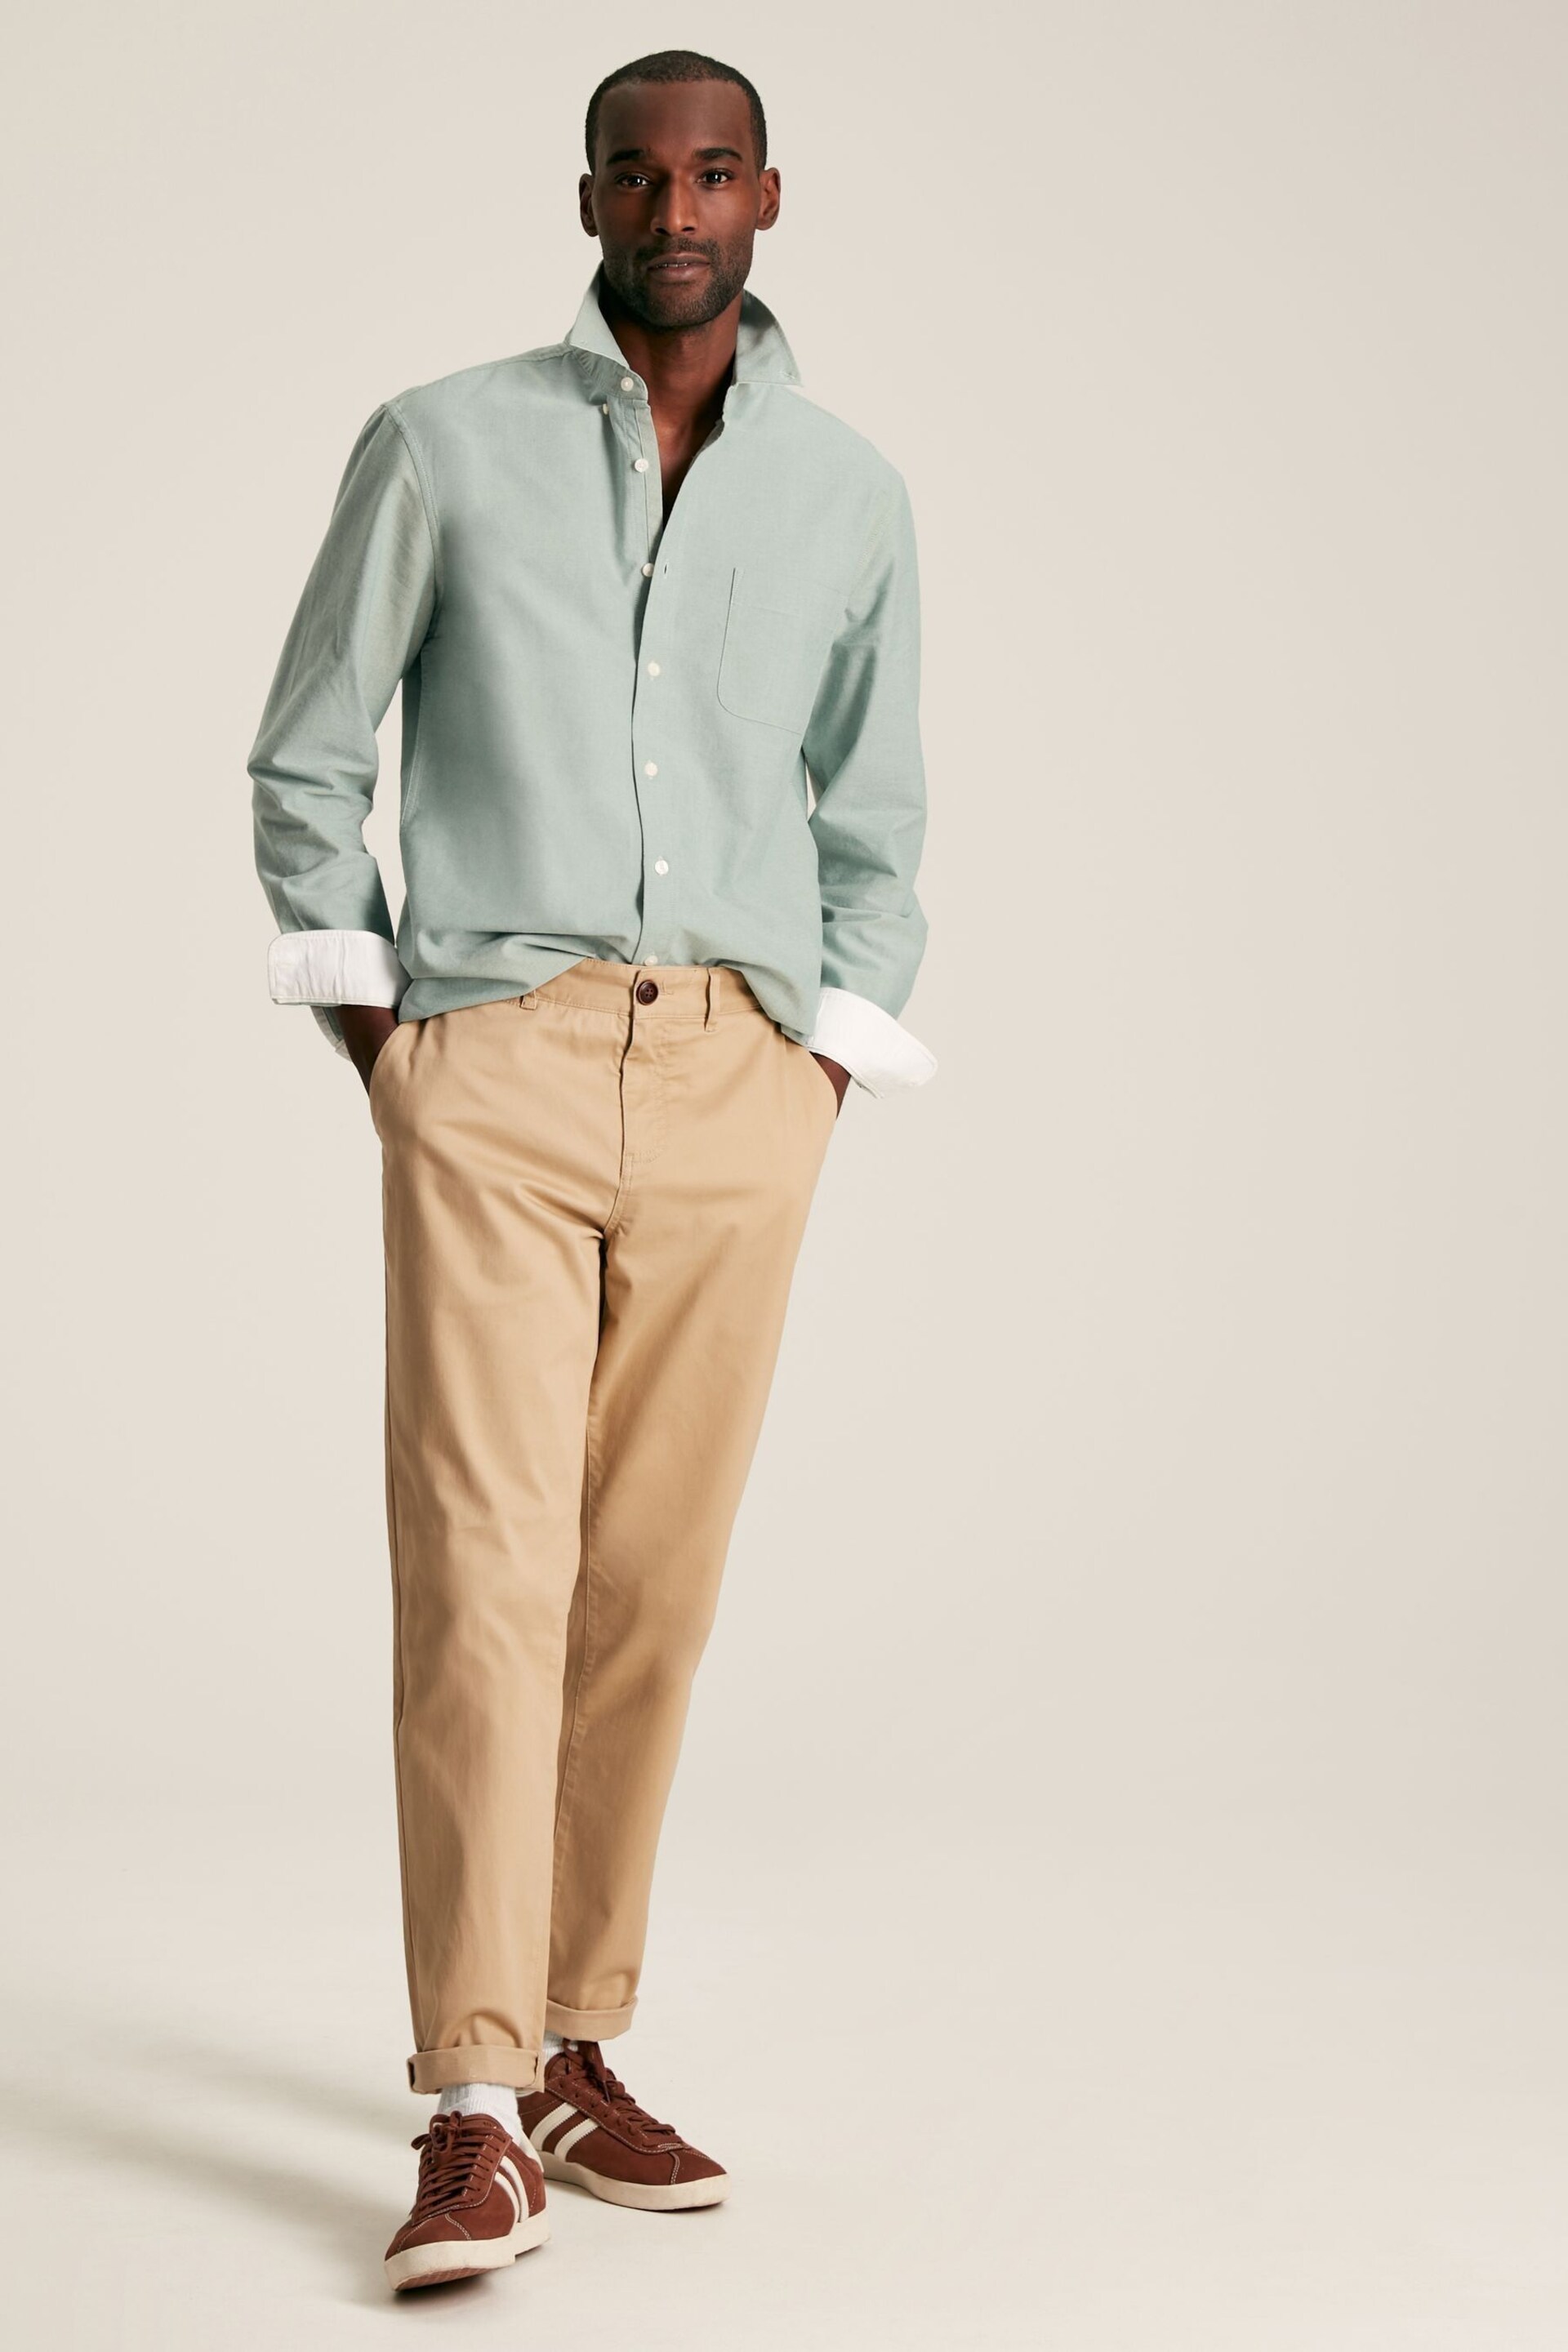 Joules Oxford Sage Green Classic Fit Shirt - Image 7 of 12